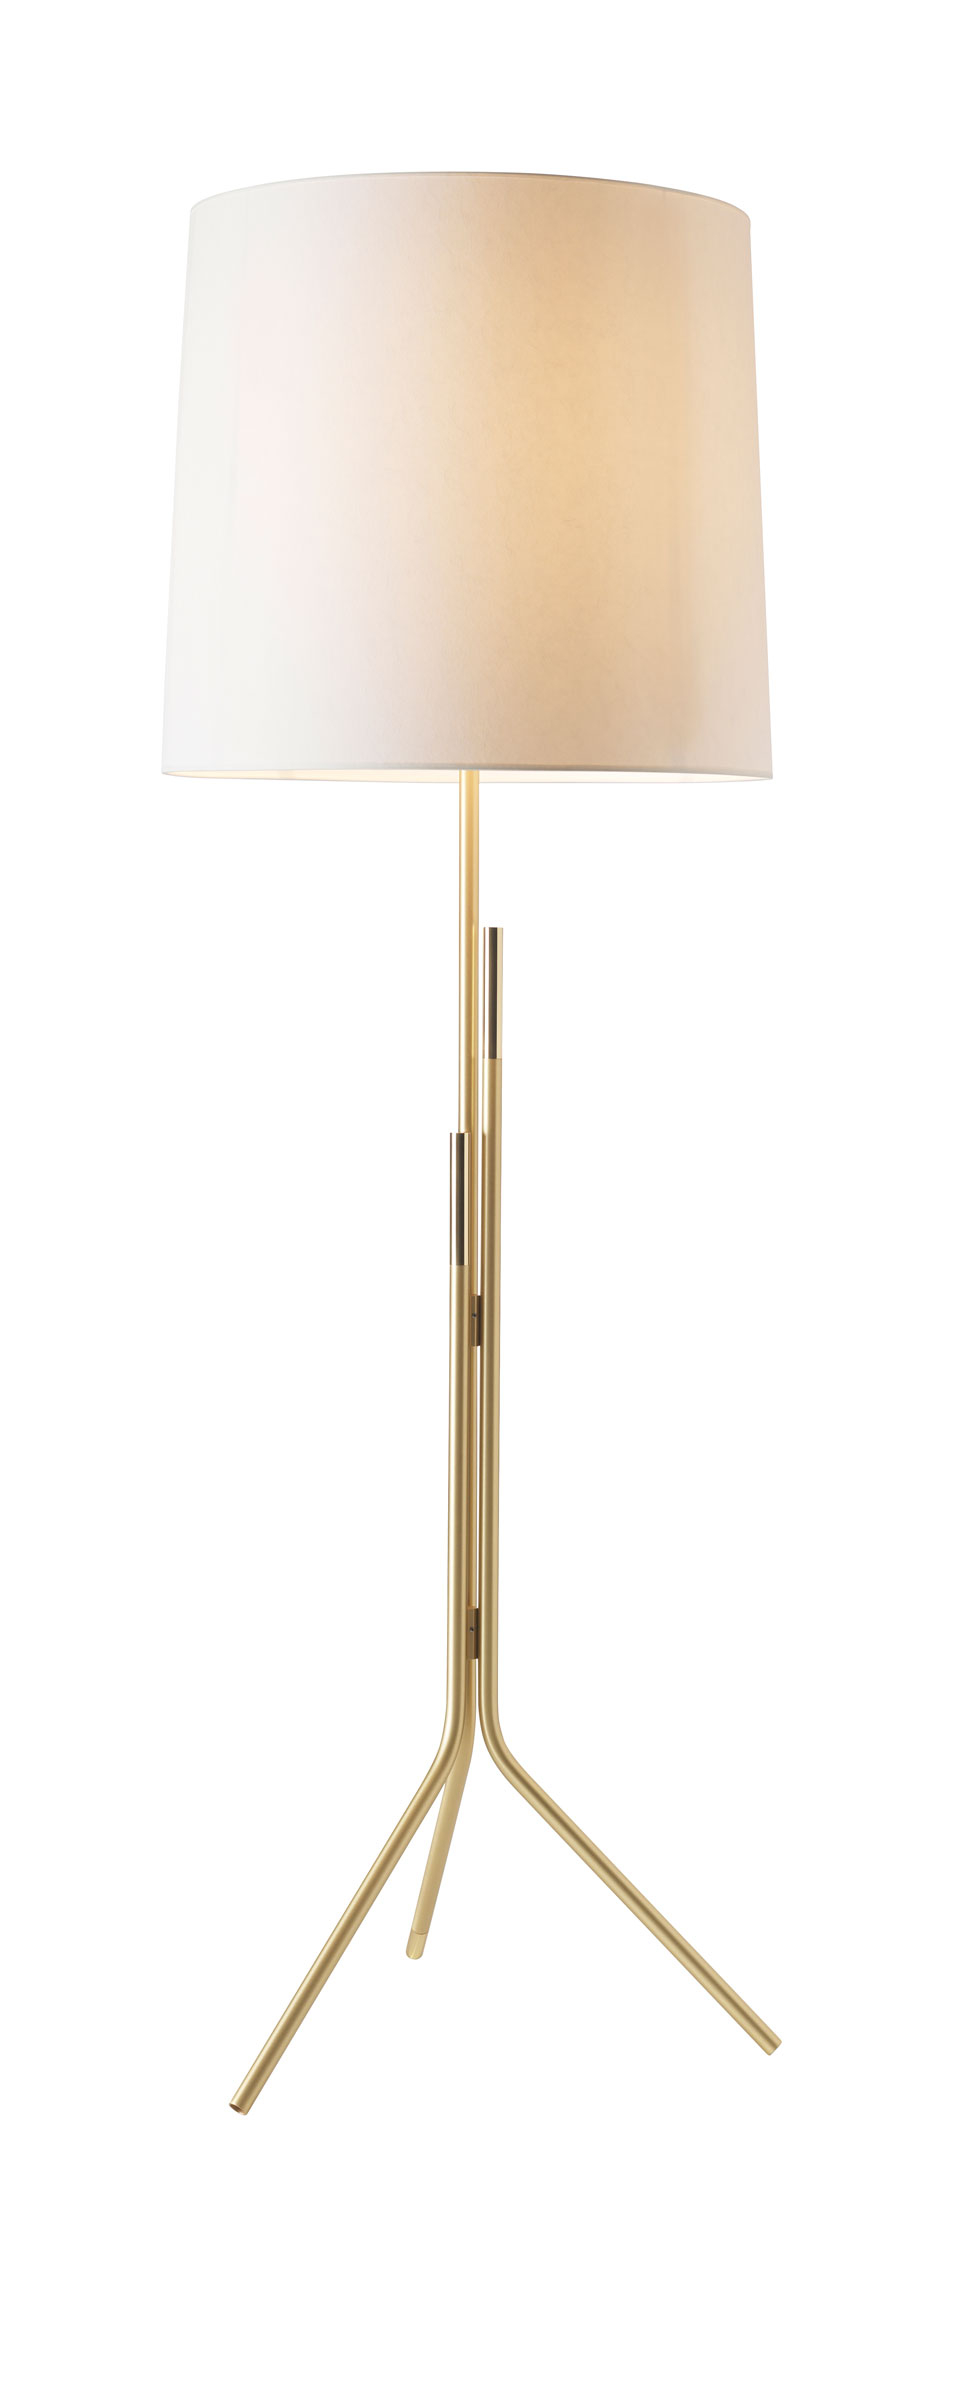 Contemporary Floor Lamp Brass Stand Cylindrical Shade In White Drop Paper Design Herv Langlais regarding proportions 960 X 2399